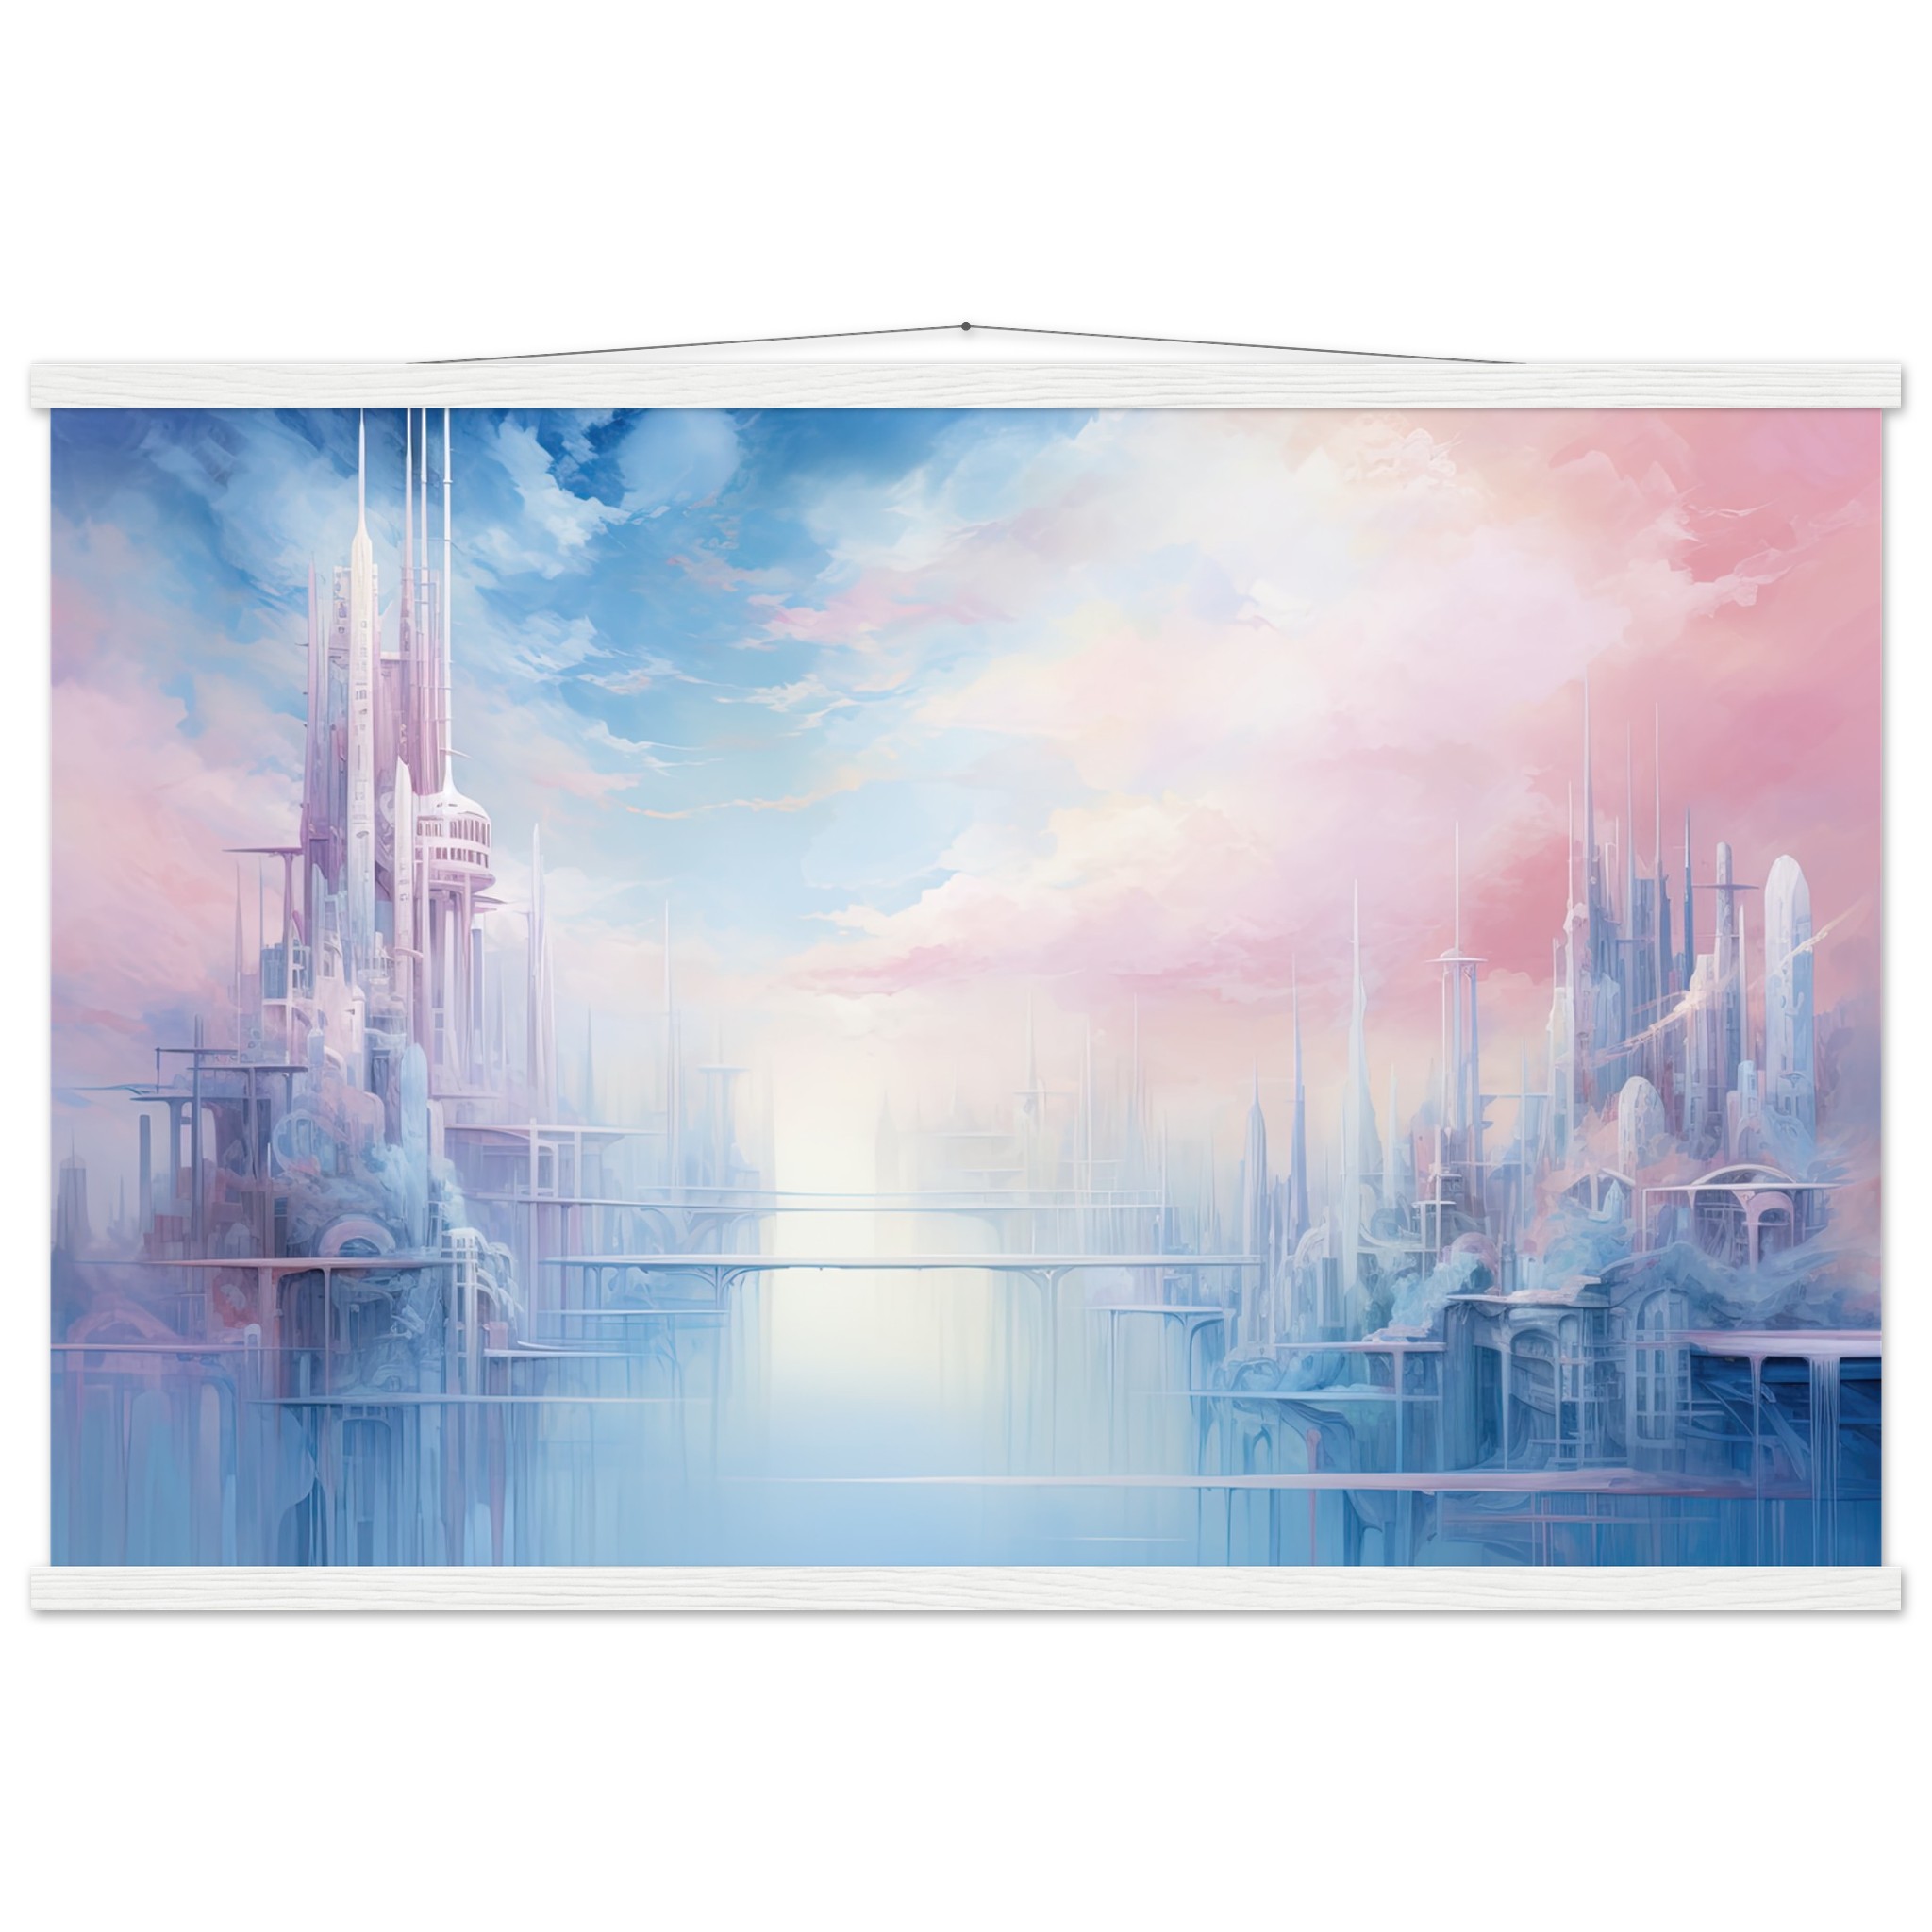 Pastel City in the Clouds Hanging Print – 60×90 cm / 24×36″, White wall hanger